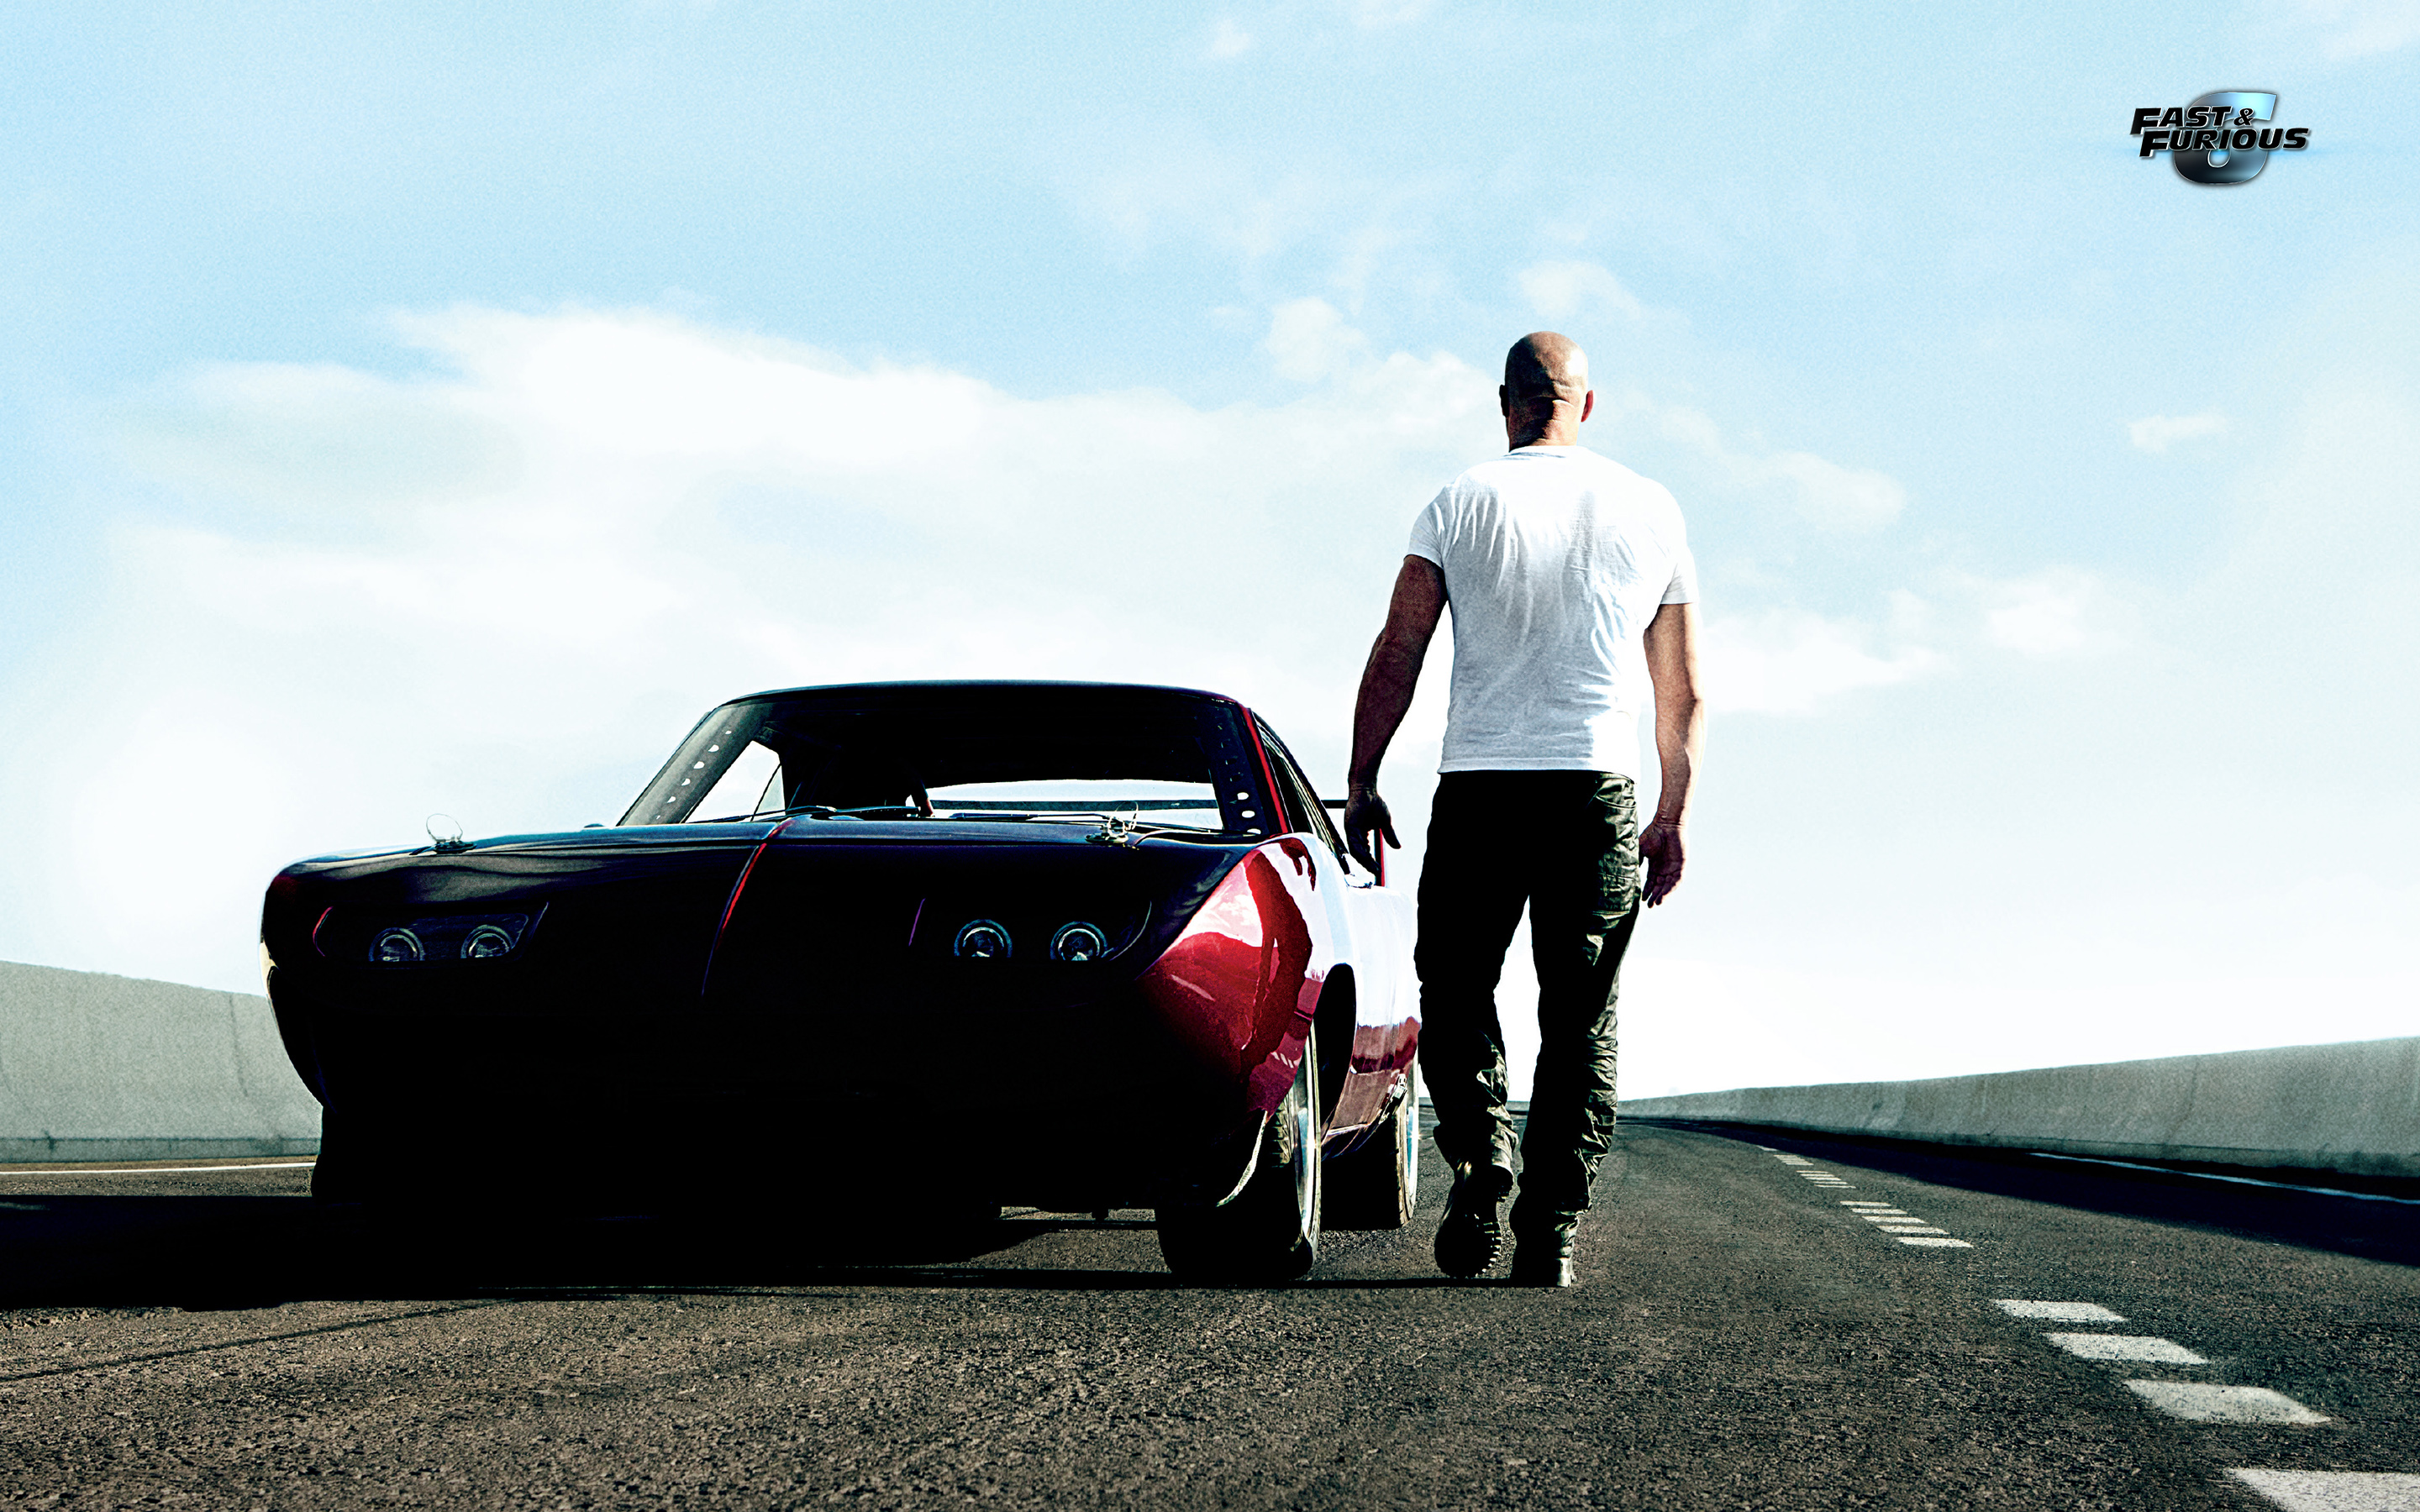 Podcast: Fast & Furious 6, Top 3 Car Chases, Before Sunset – Episode 14